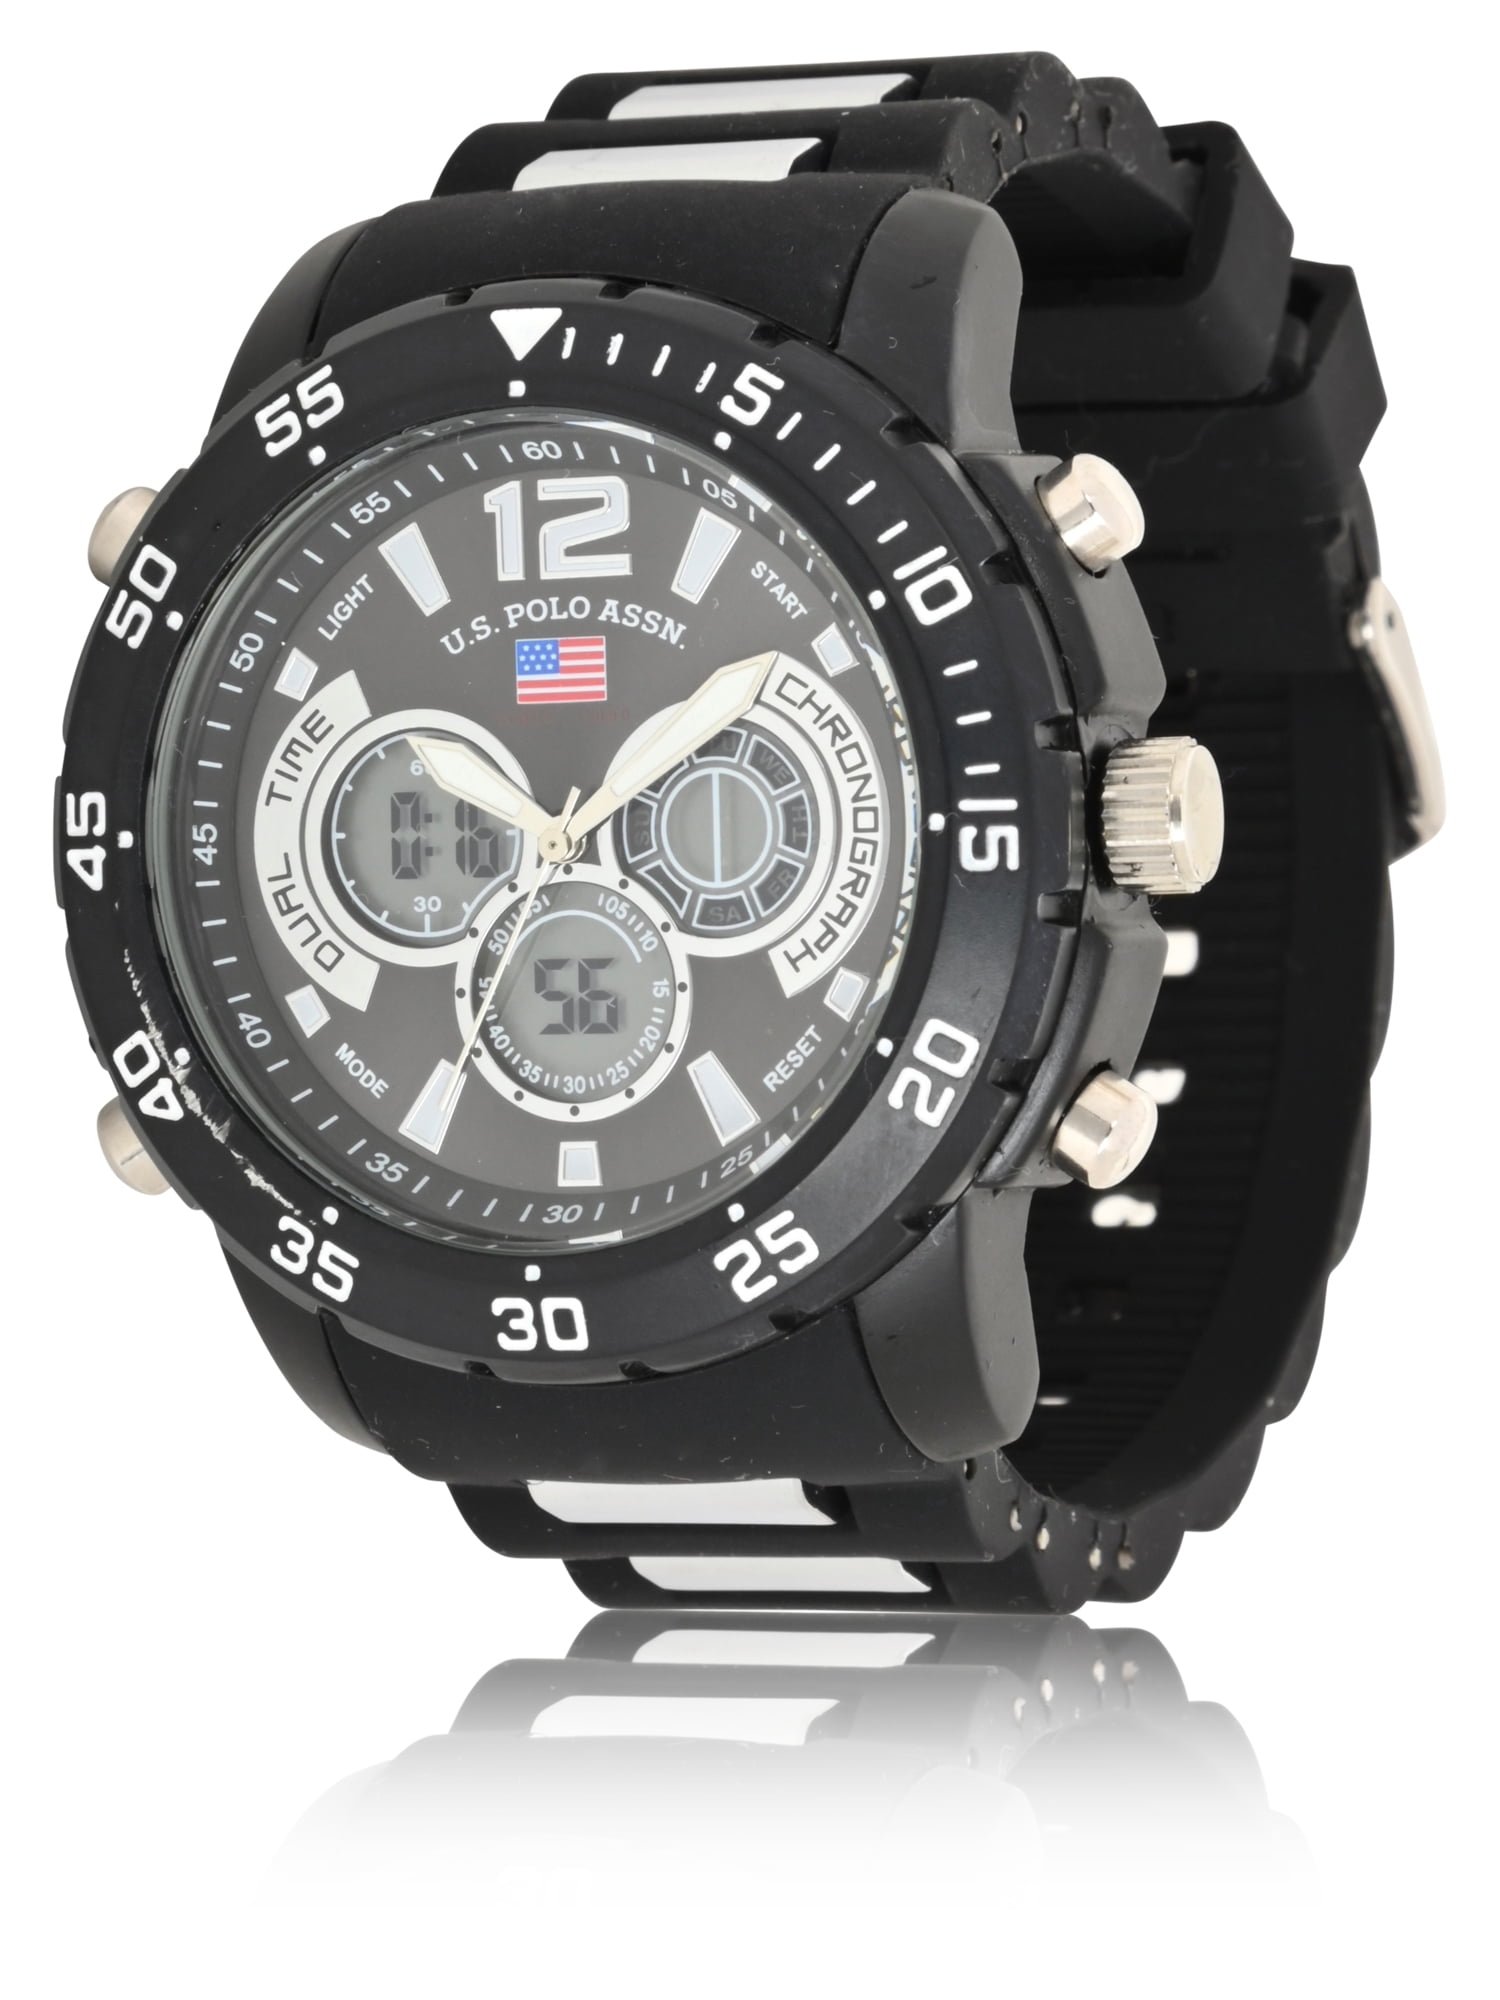 U.S. Polo Assn. Adult Male Sport Analog/Digital Watch with Black Rubber ...